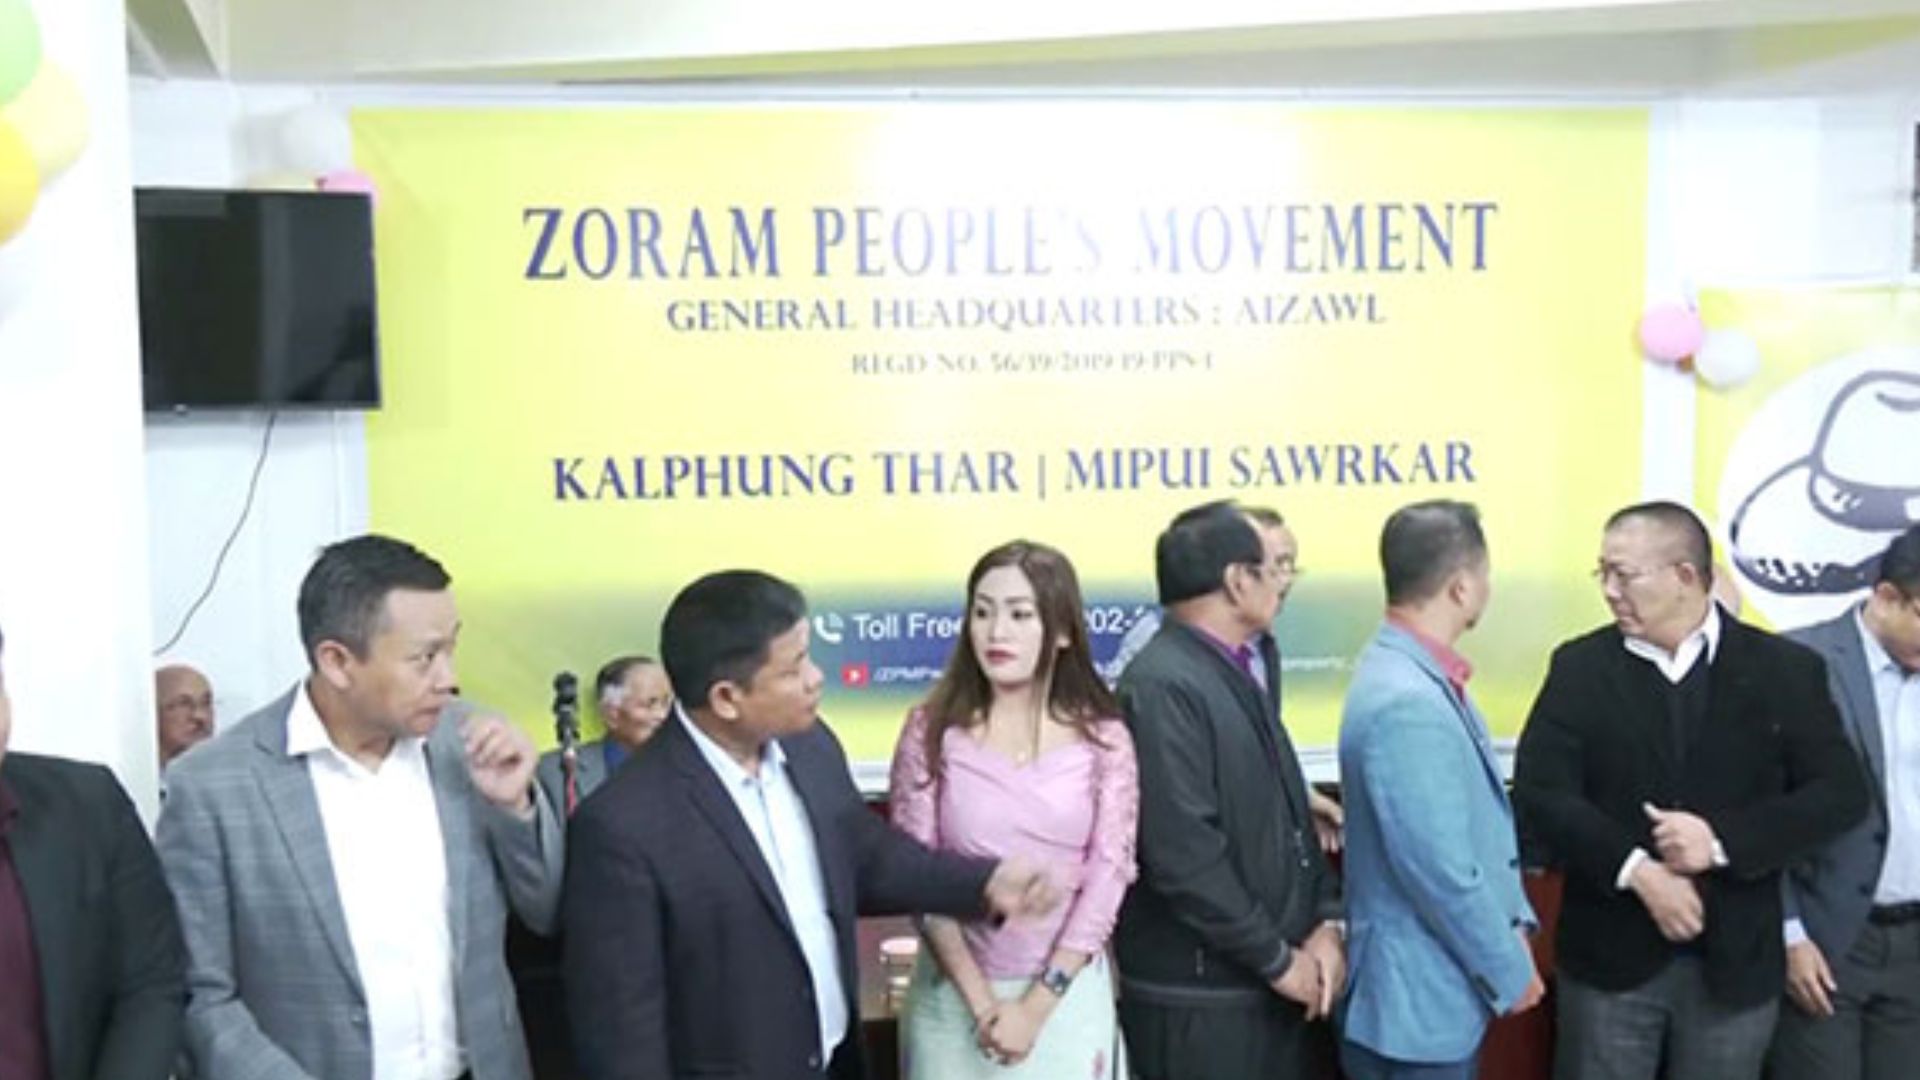 Zoram People’s Movement Conducts Worship Service at Party Office in Aizawl